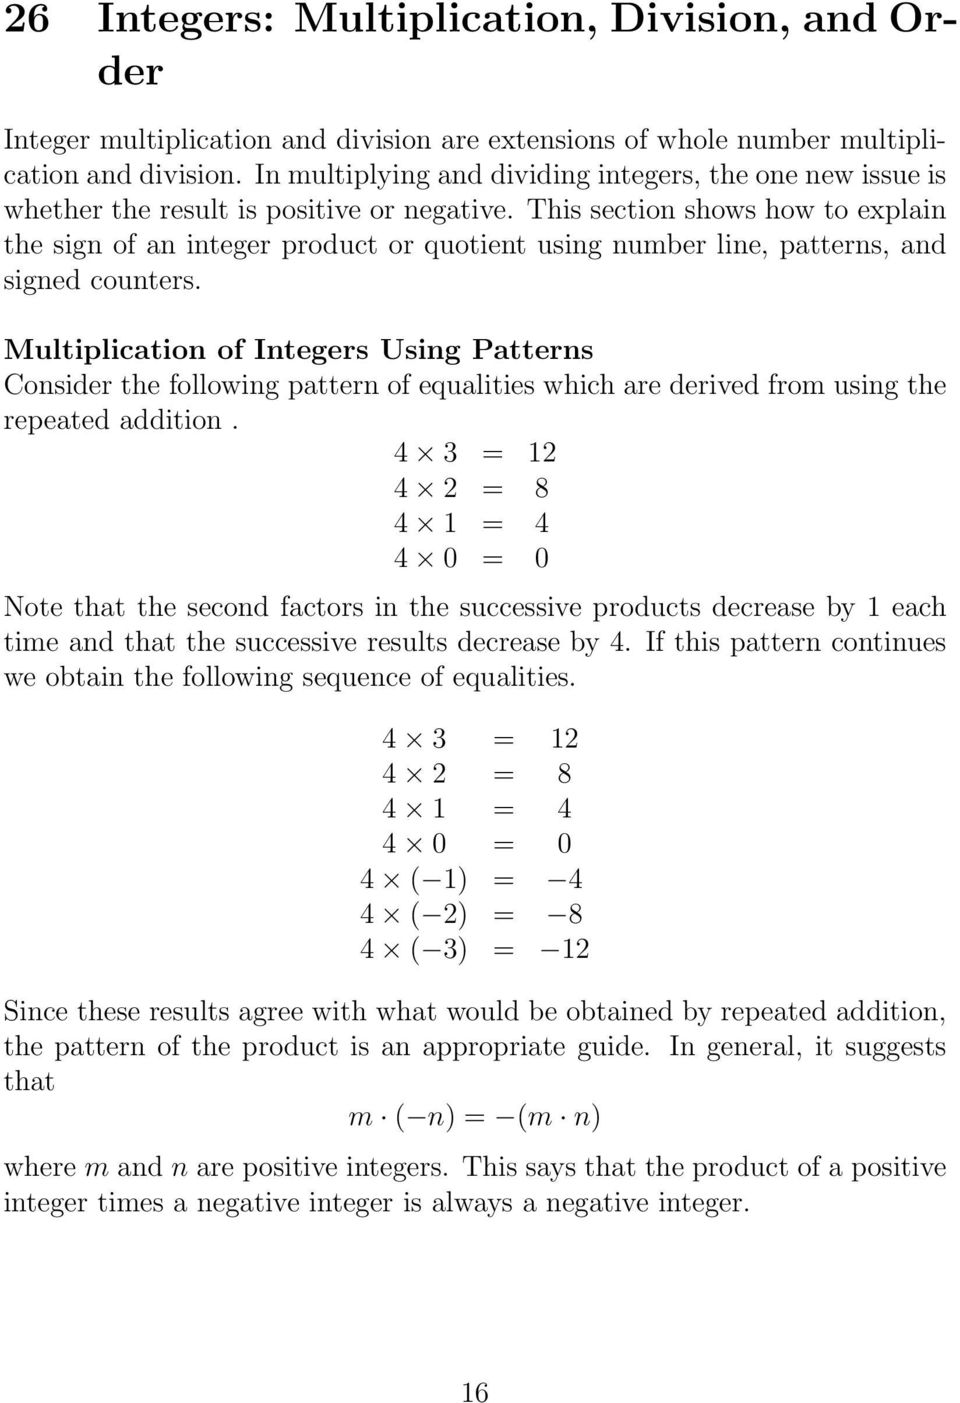 This section shows how to explain the sign of an integer product or quotient using number line, patterns, and signed counters.